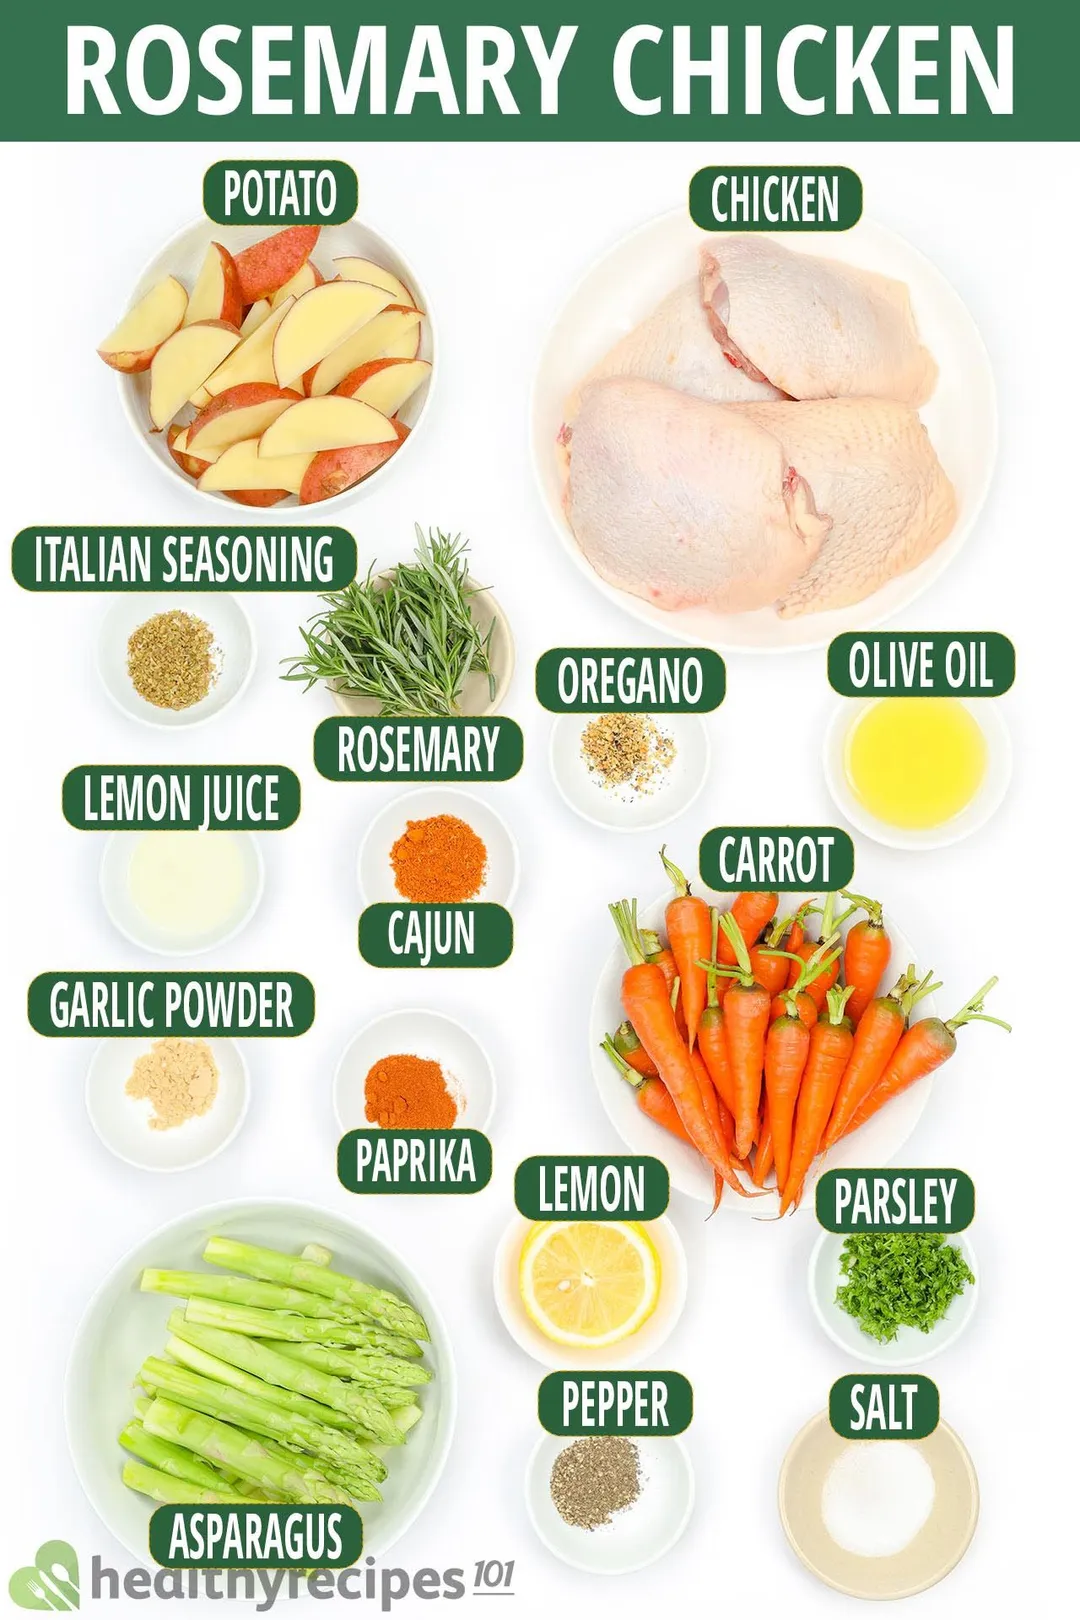 Ingredients for Rosemary Chicken